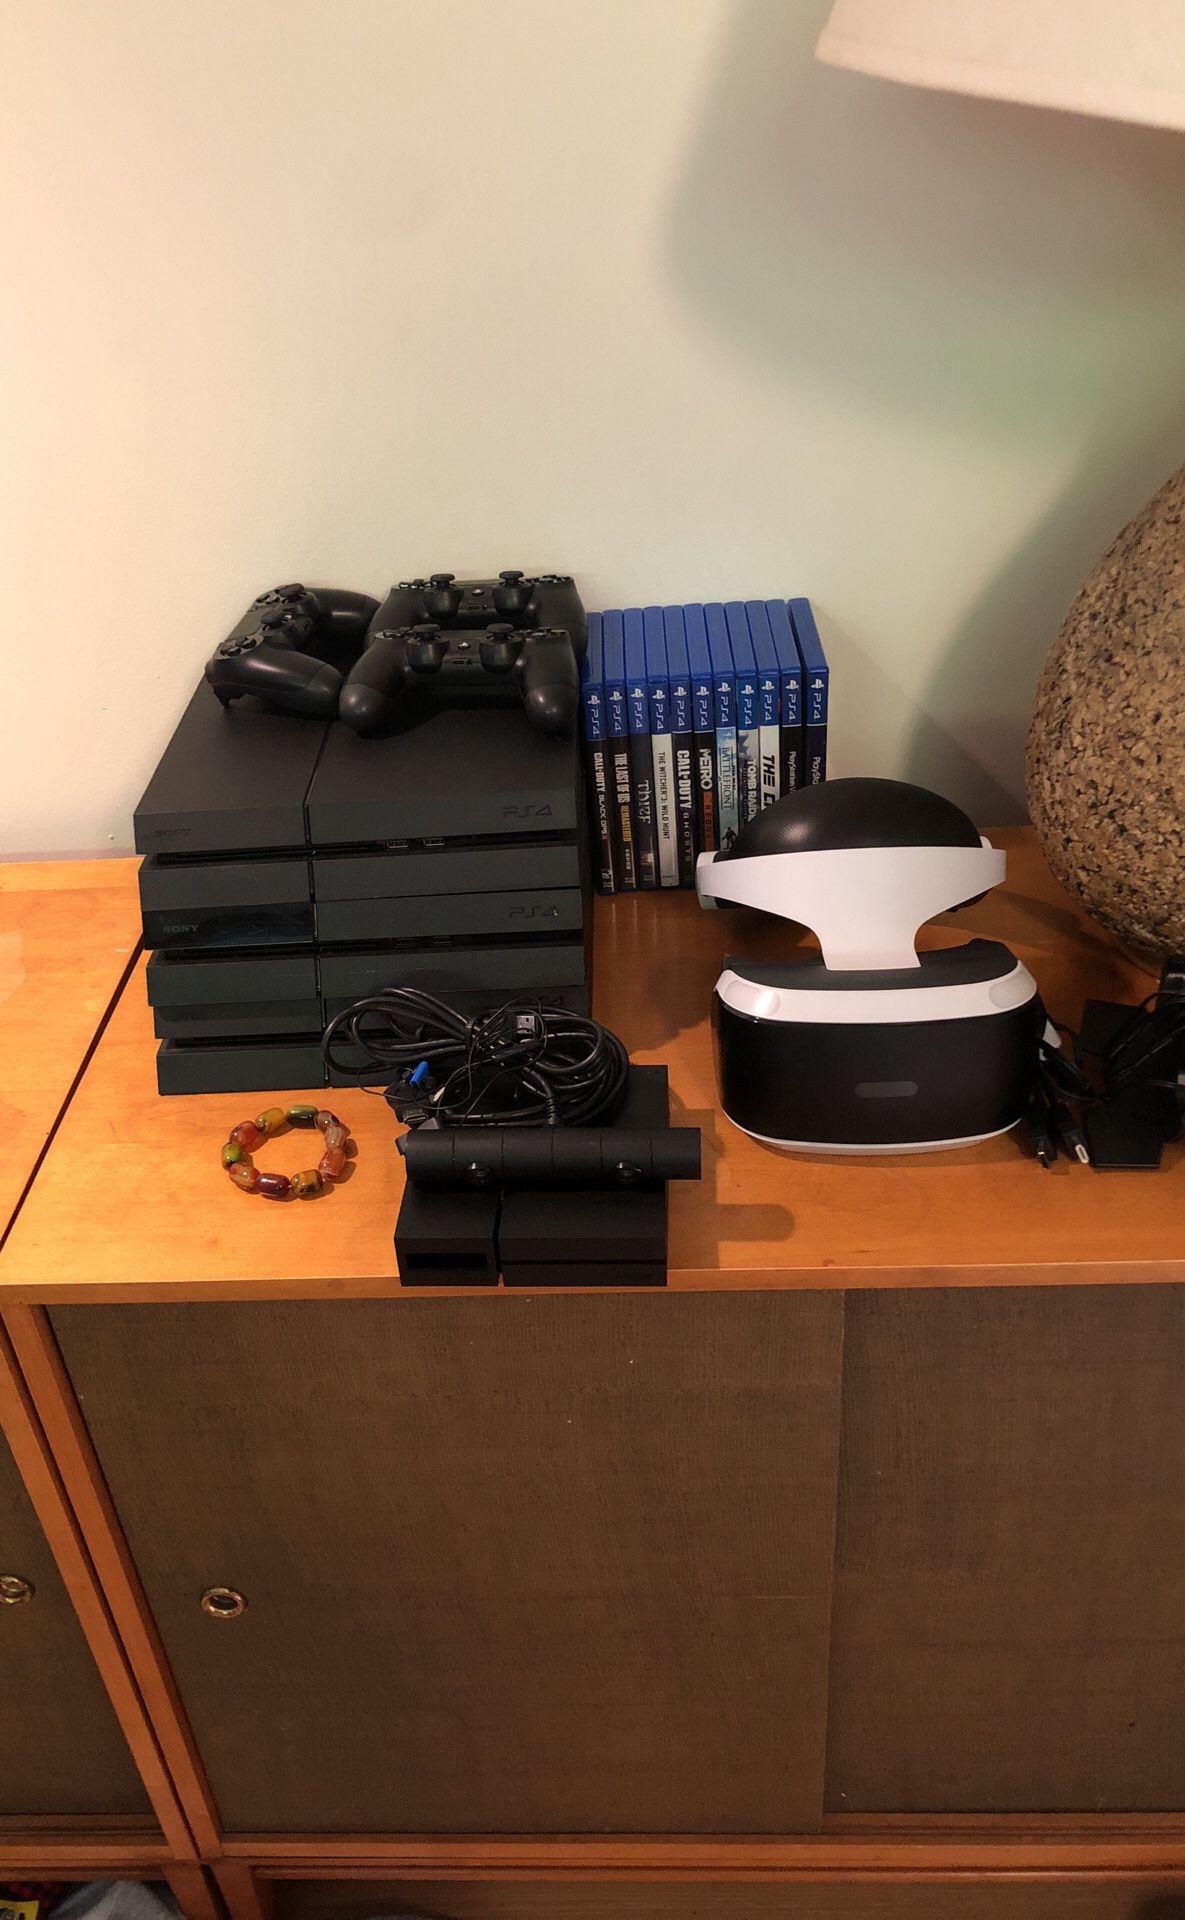 3 ps4s 3 controllers 11 games vr headset and all wires